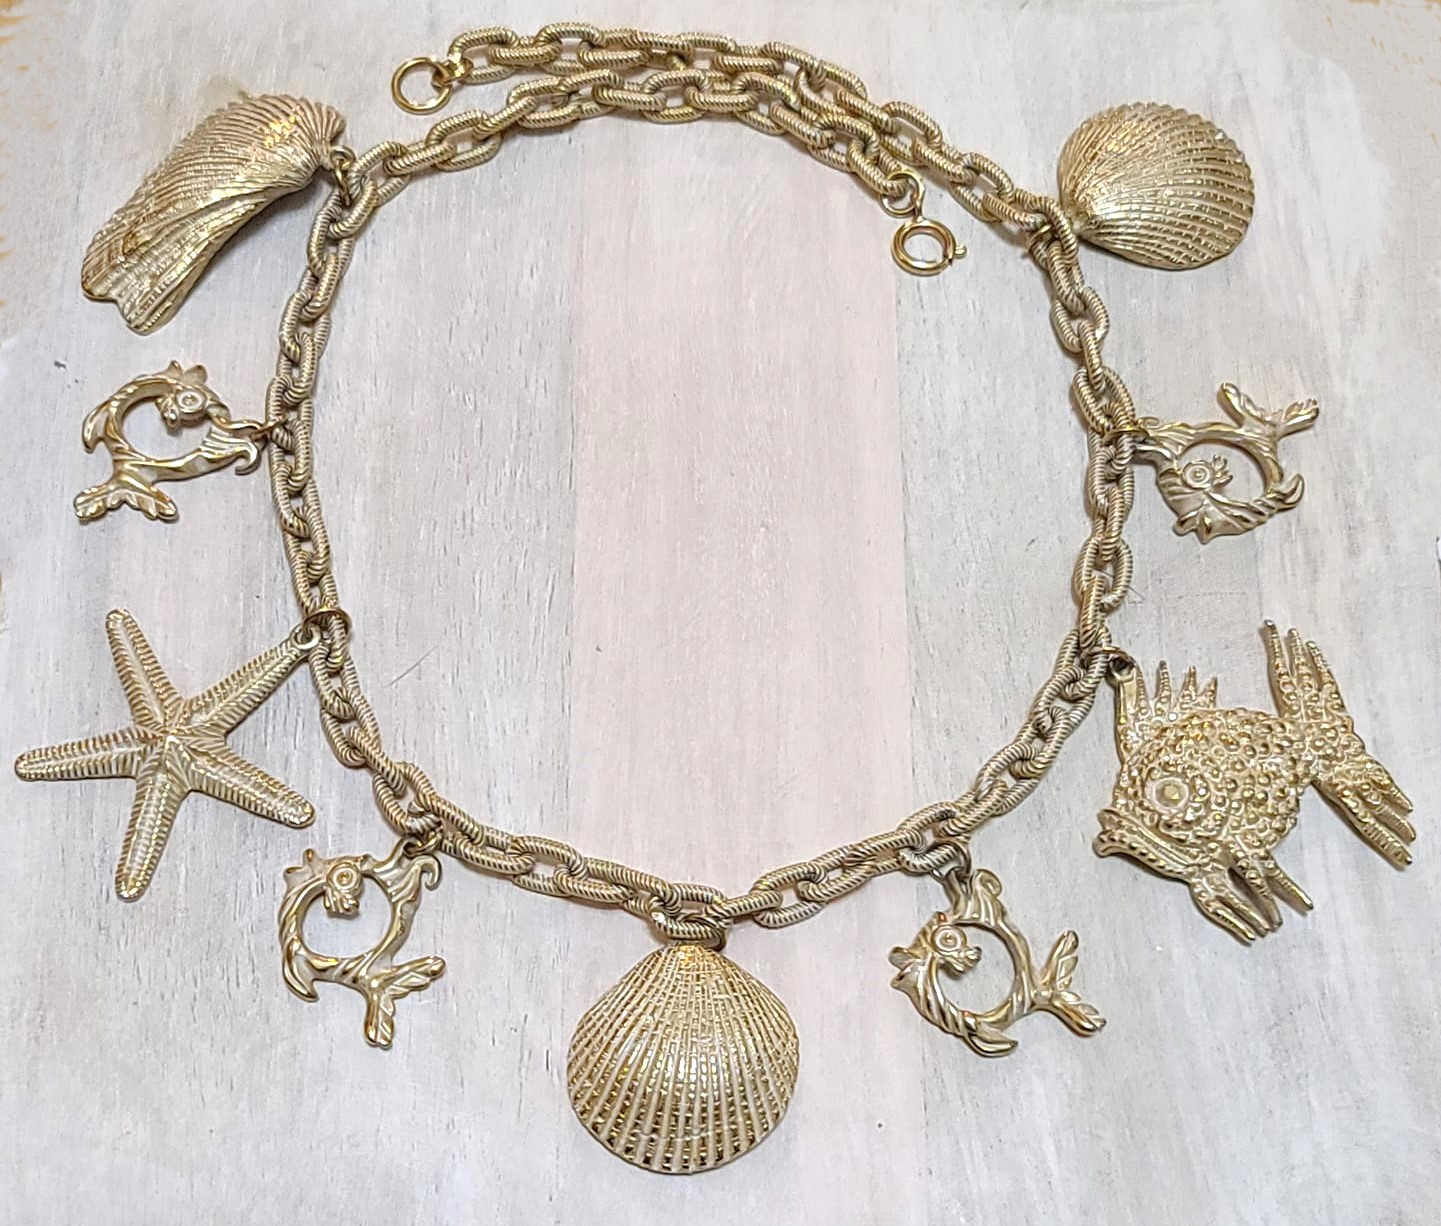 Seaside shells and fish charm vintage necklace